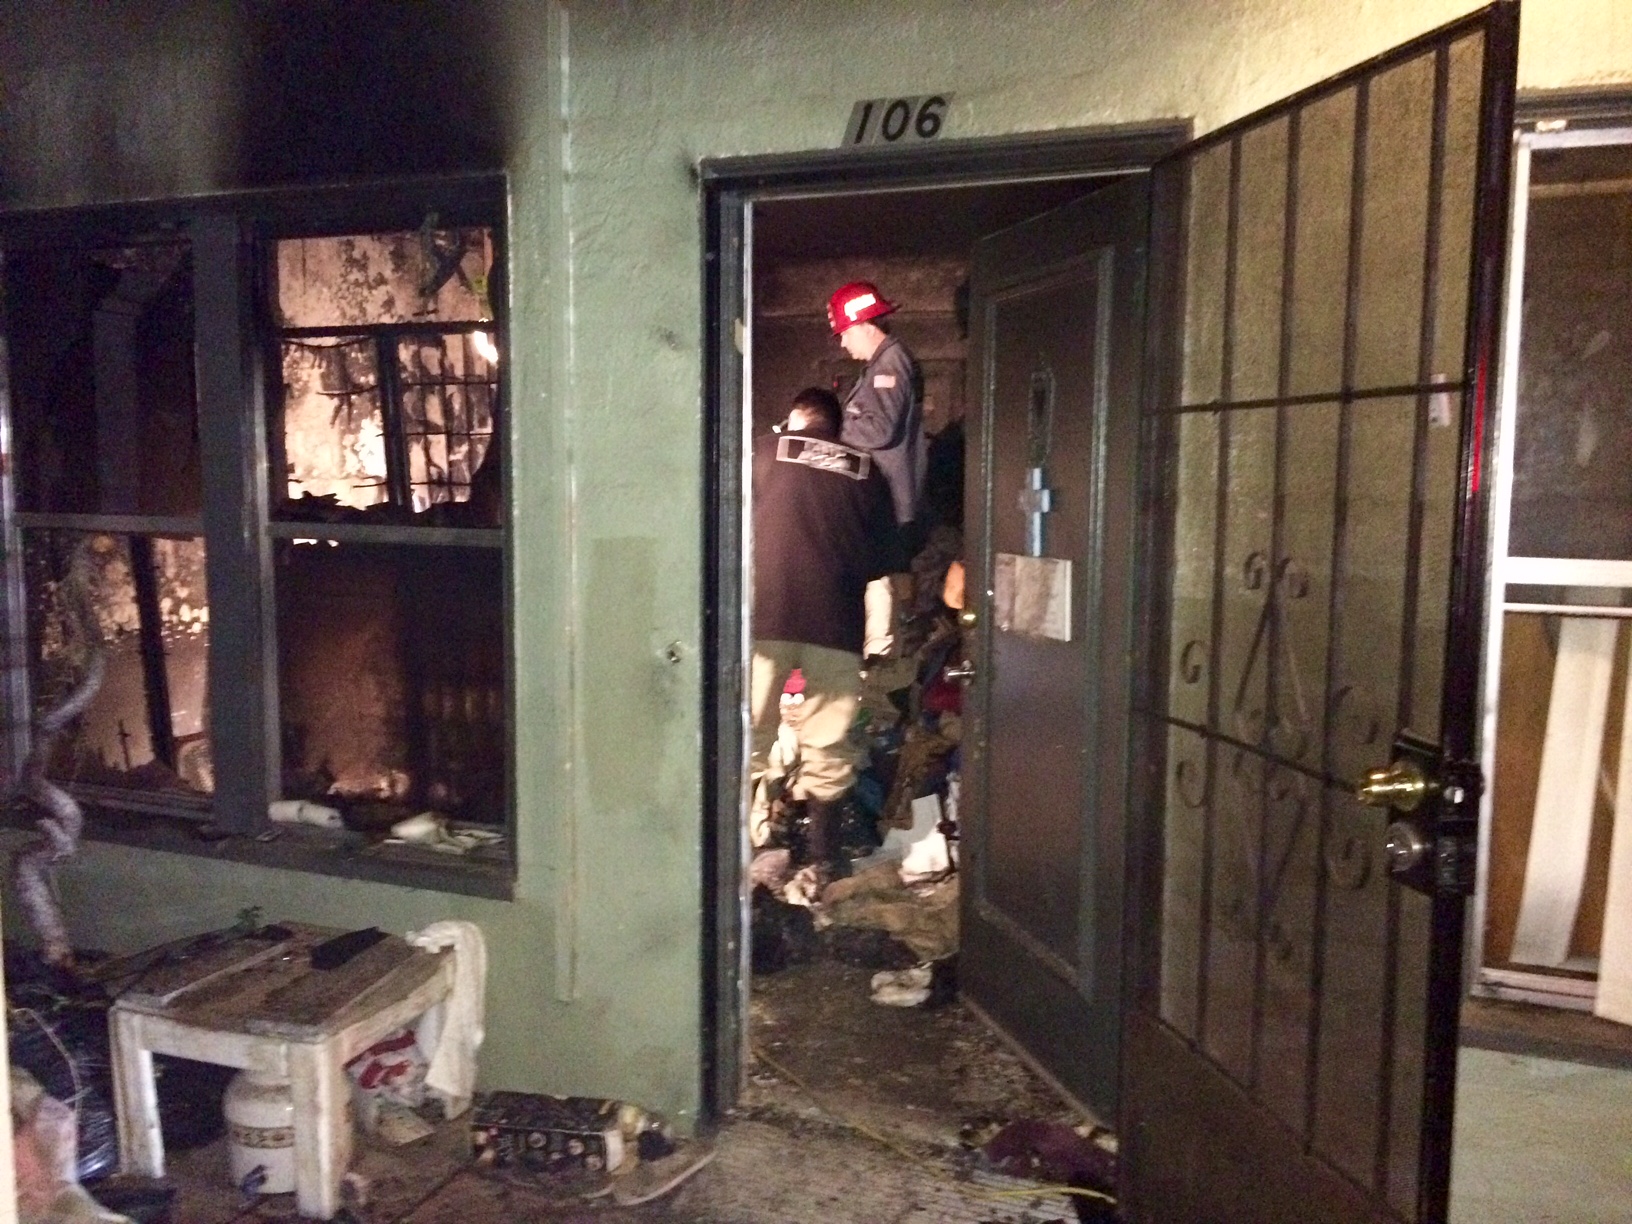 Arson determining cause of late night fire taking the life of elderly woman